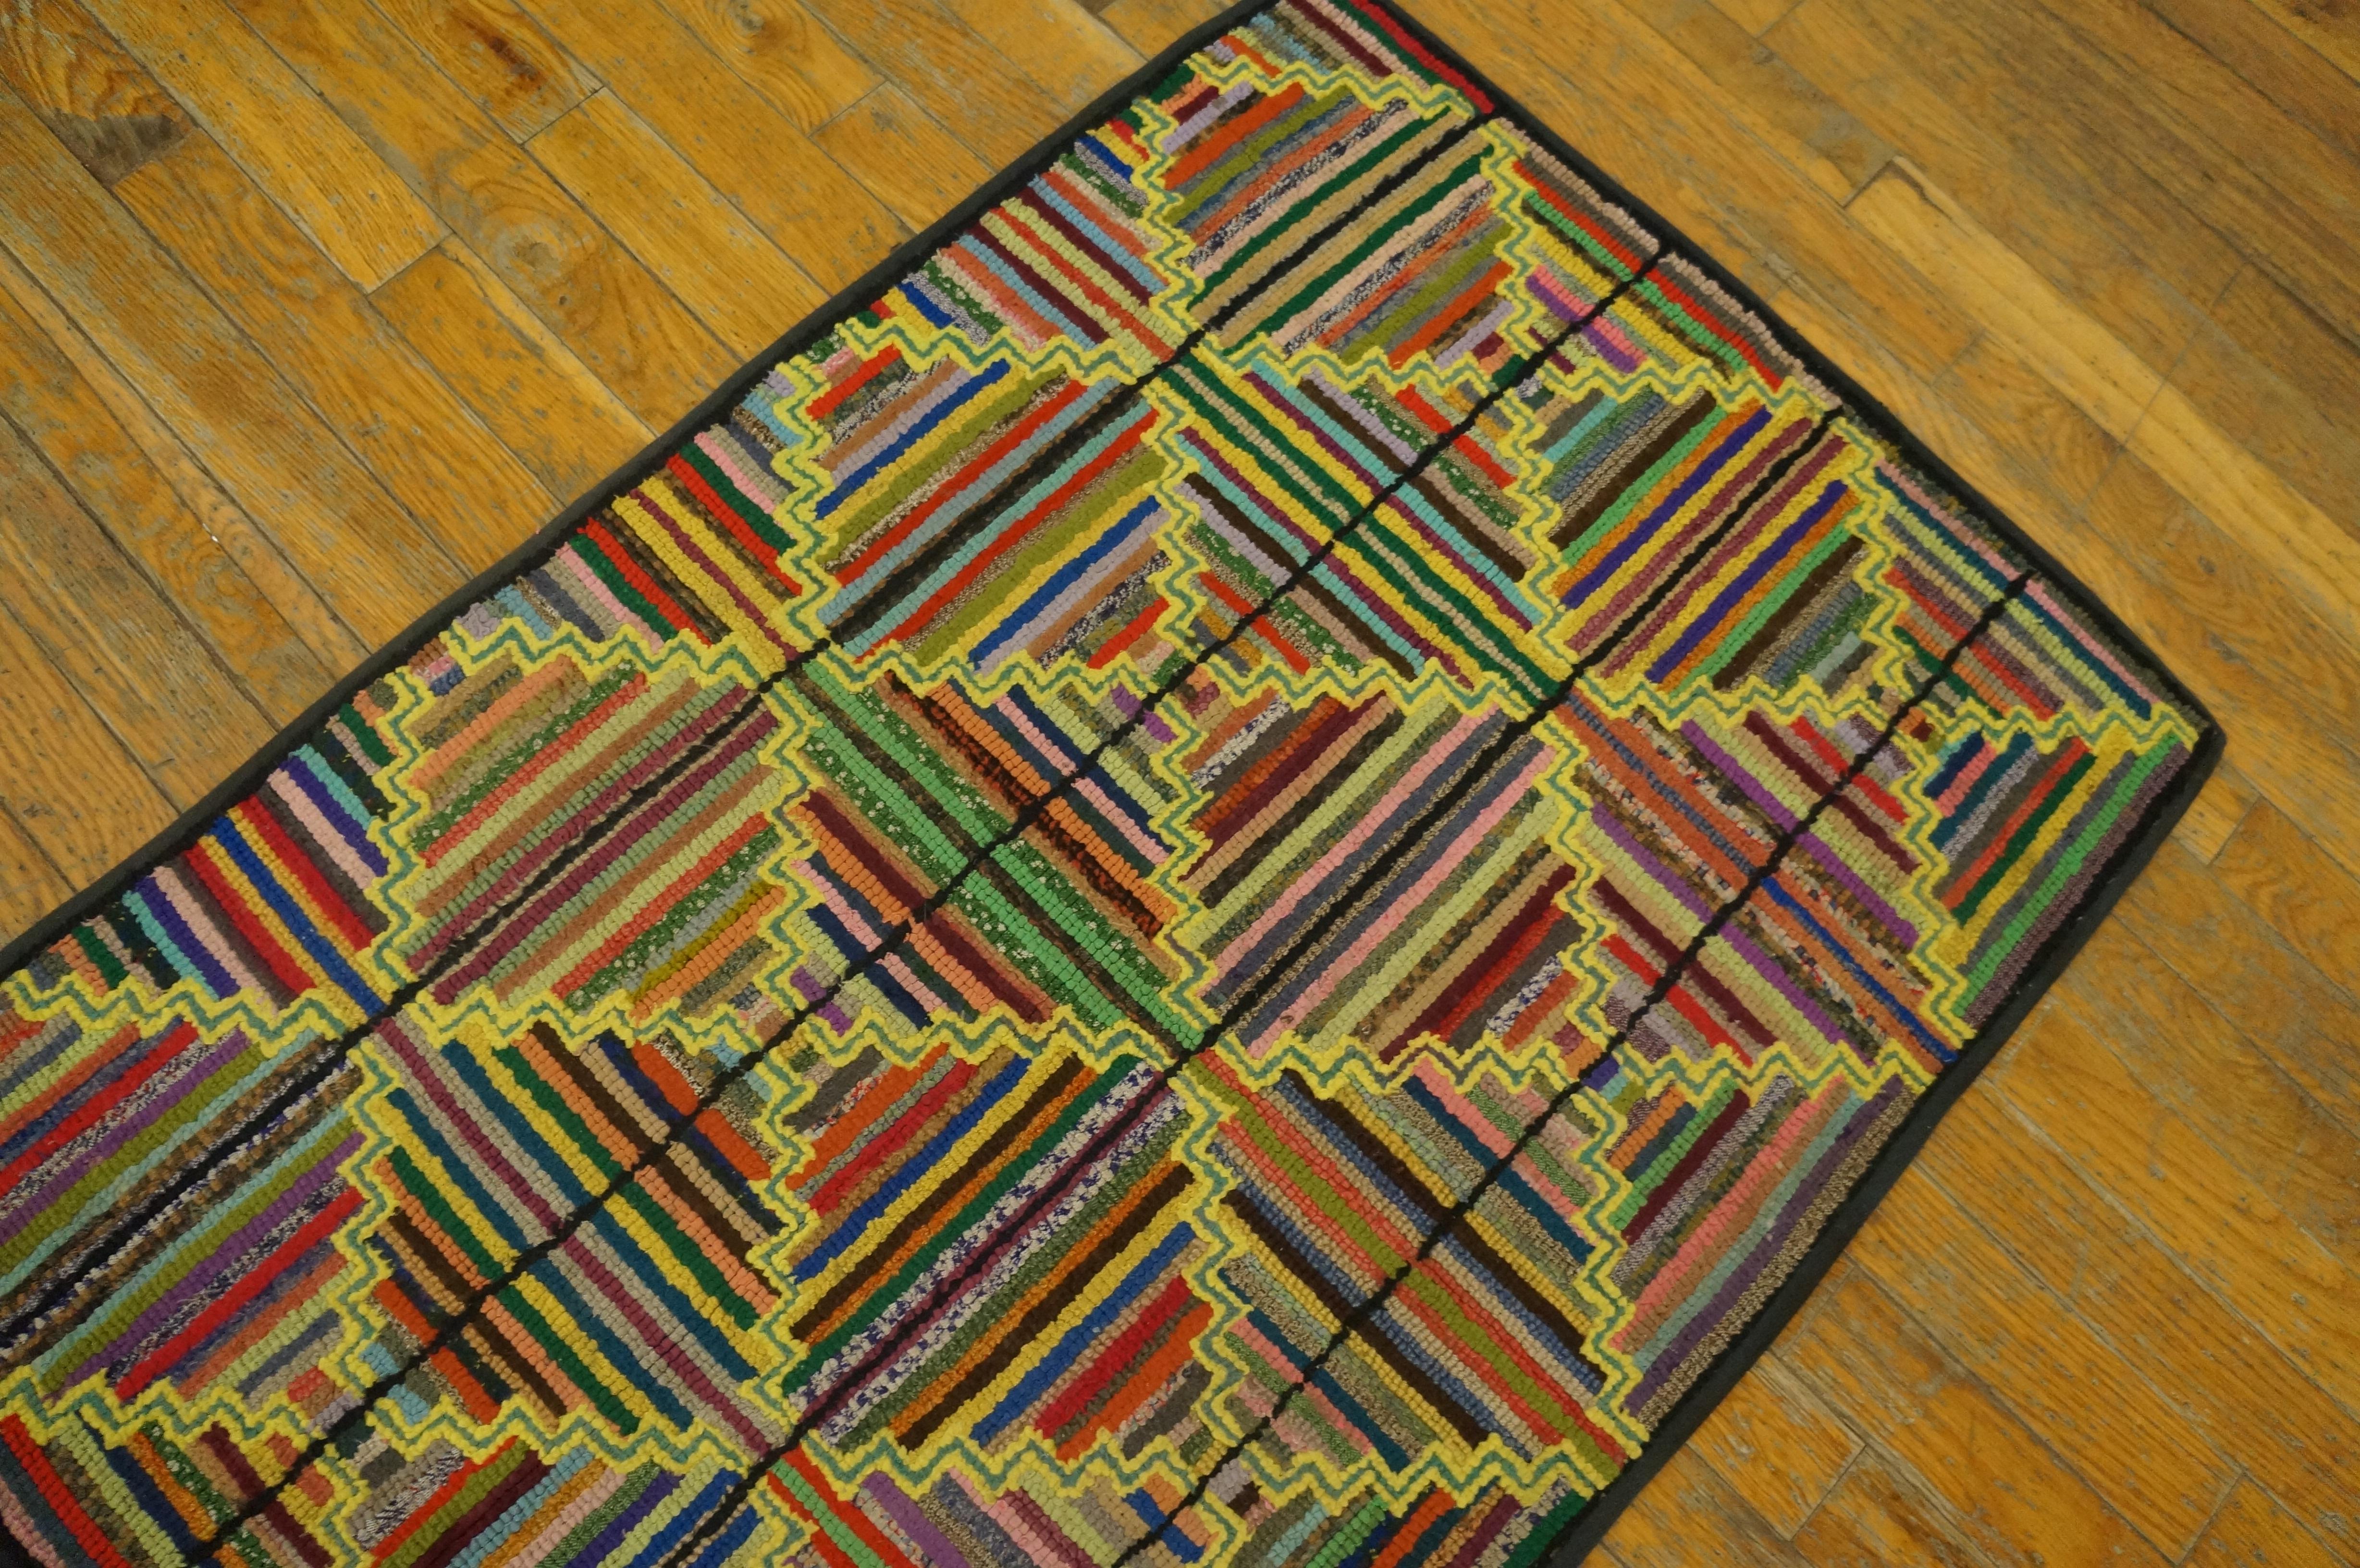 Hand-Woven 1930s American Hooked Rug ( 2' 3'' x 3' 5'' - 68 x 104 cm) For Sale